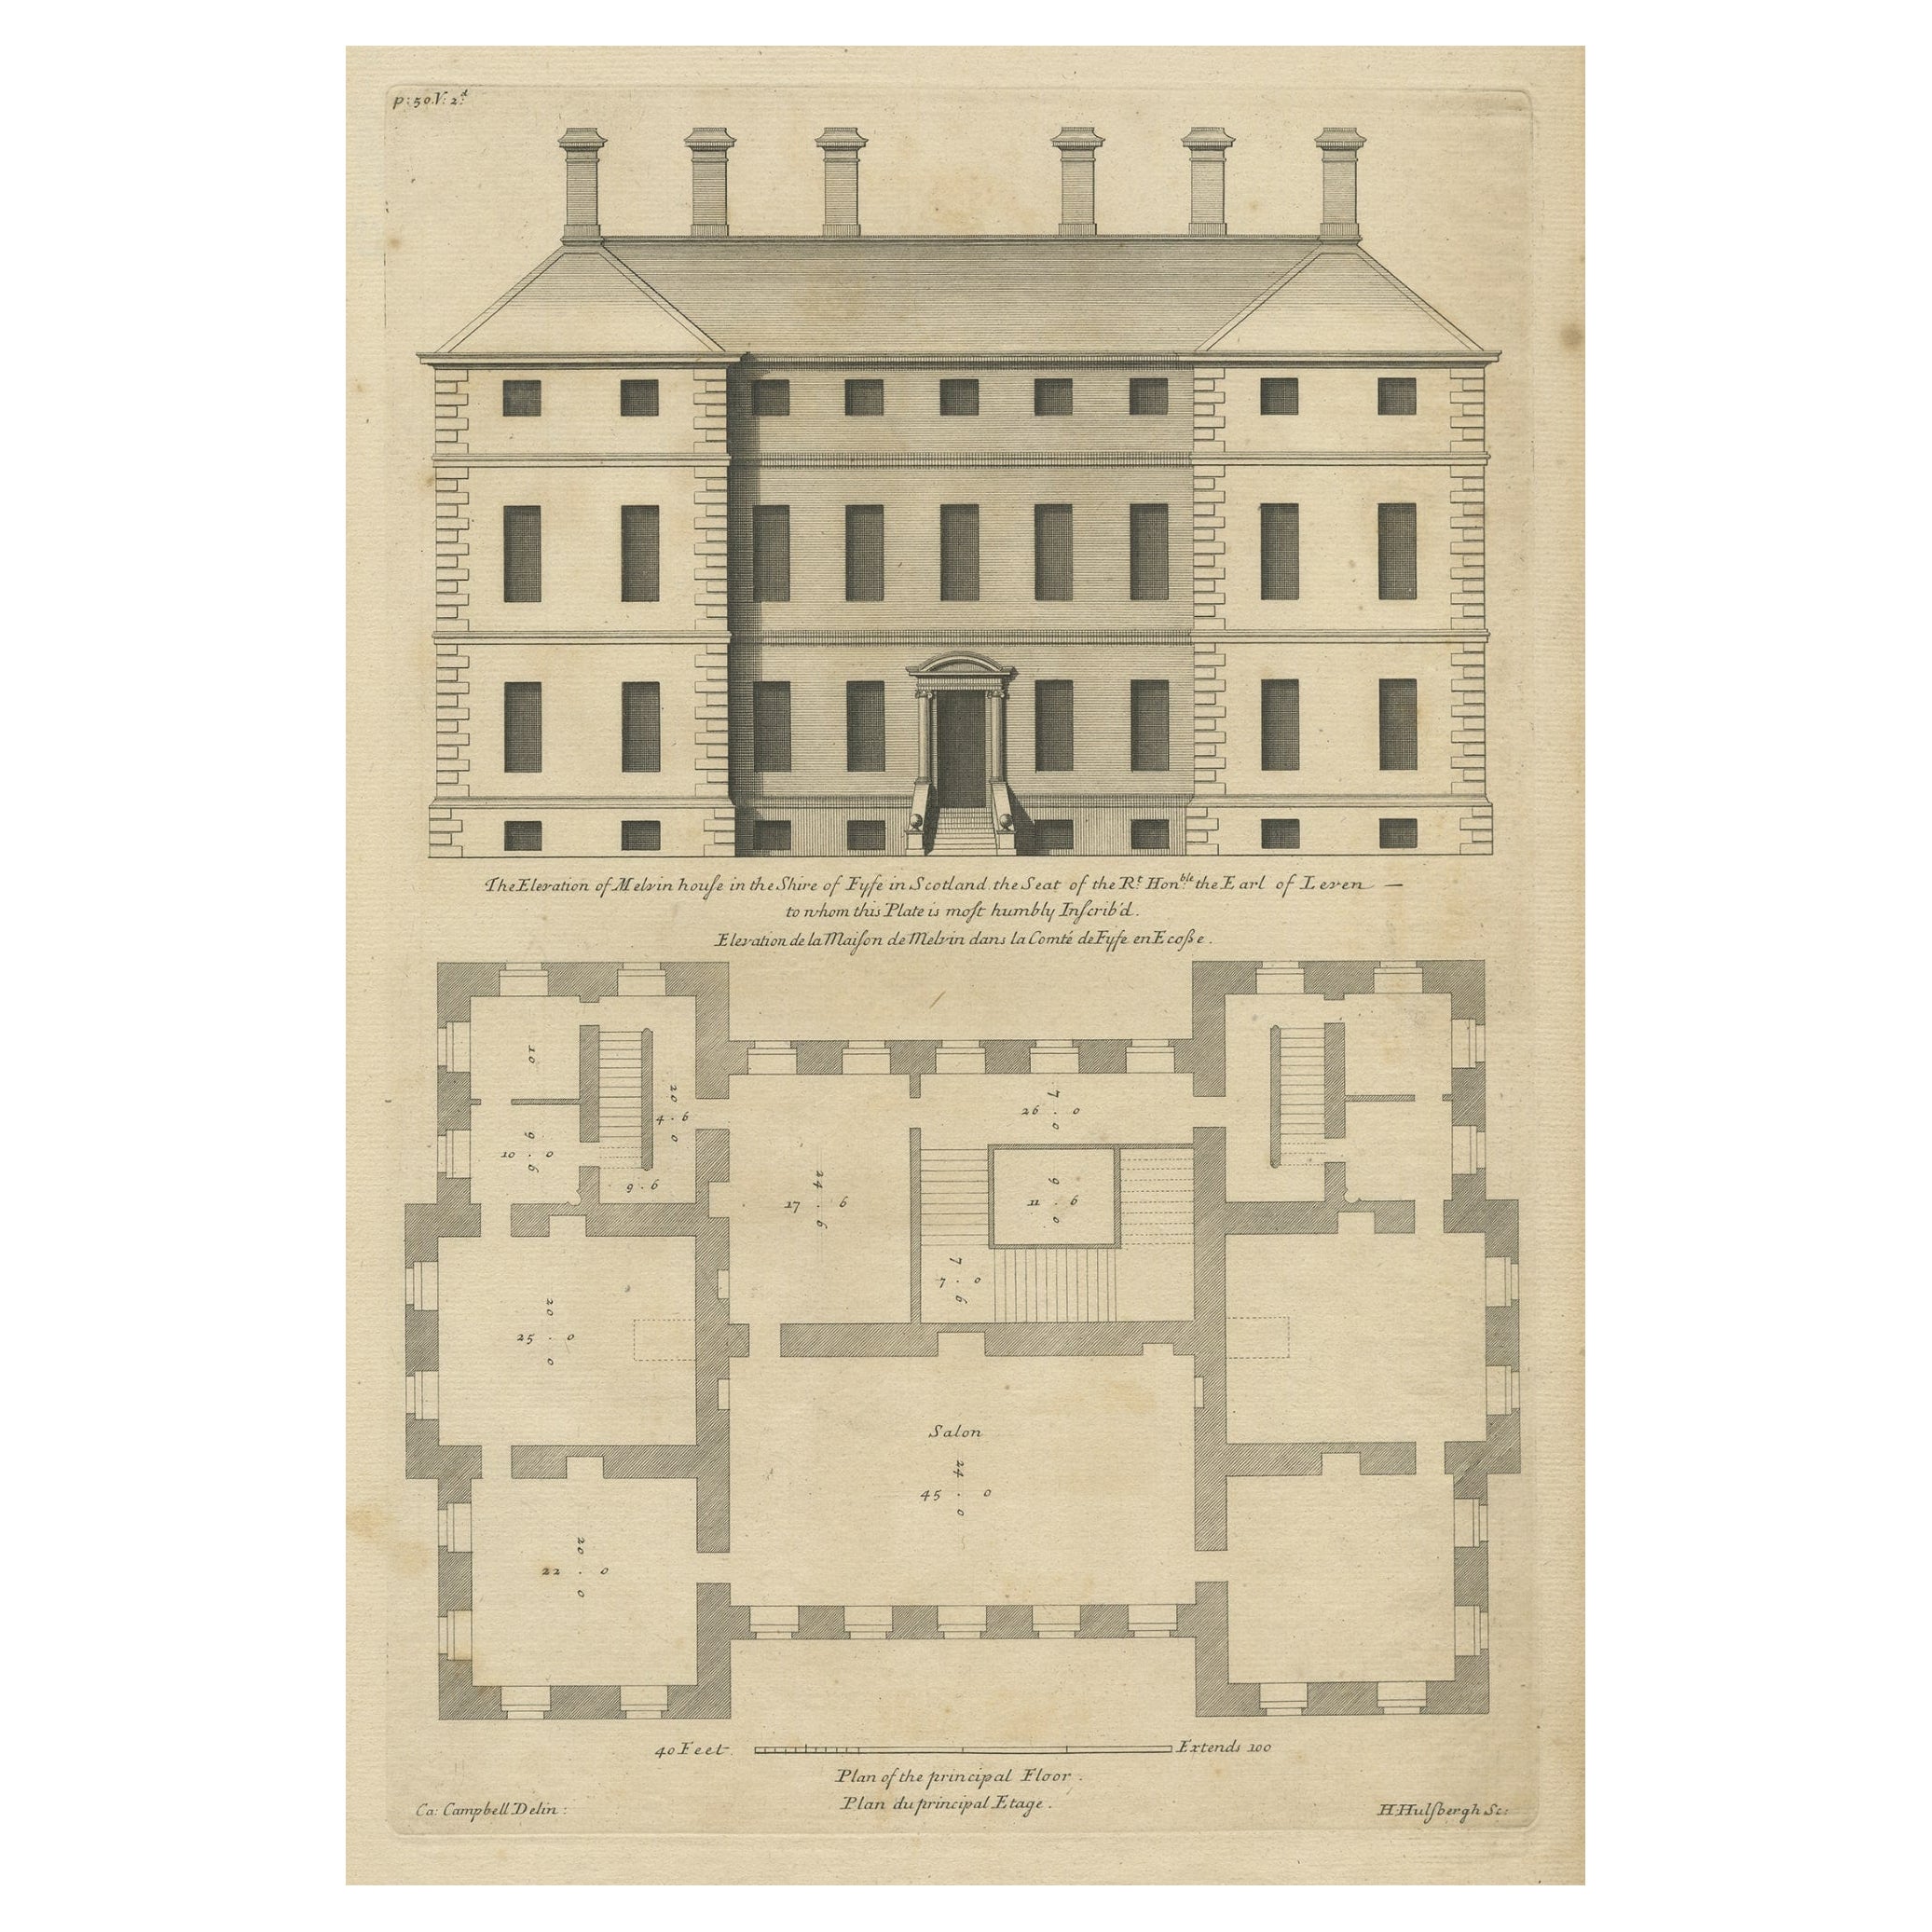 Antique Print of the Melville House in Fife, Scotland, 1725